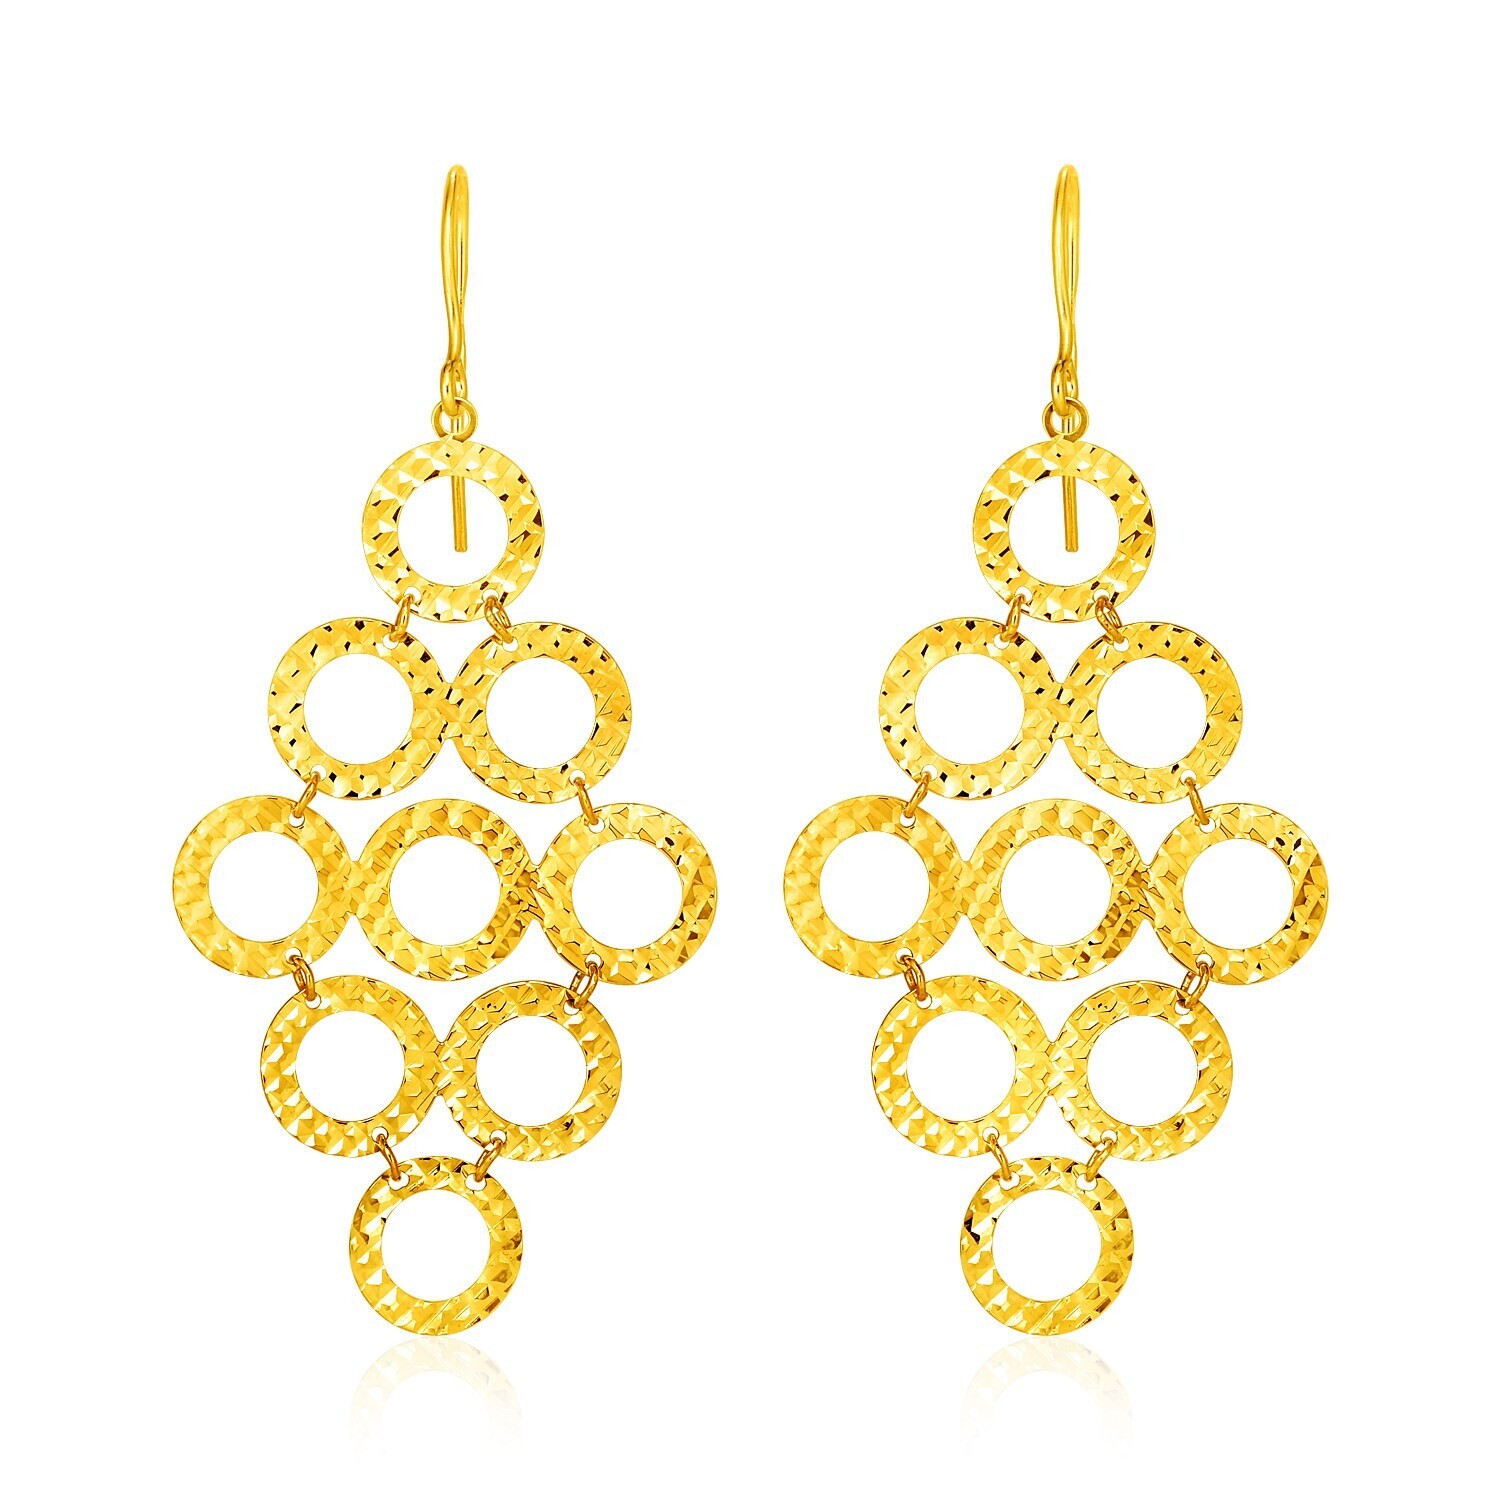 14k Yellow Gold Earrings with Textured Open Circle Motifs